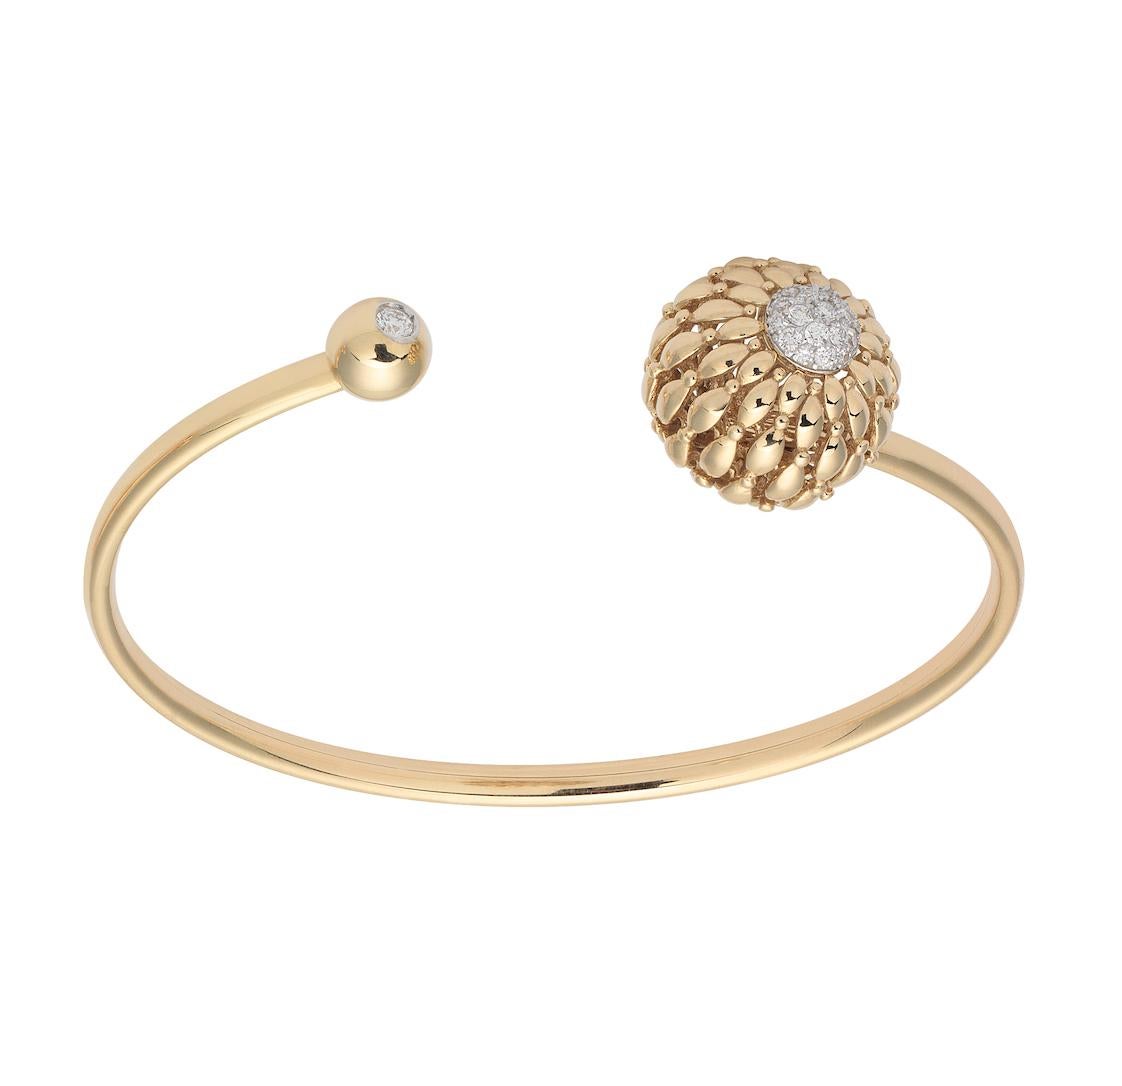 18K Yellow Gold Twist Floral Bracelet Bangle with White Diamonds.
Floral petal design is kinetic with movement, flexible open Bracelet cuff.
Gold Weight: 11.65 grams
Diamond Carats: White: 0.27 ct.
FerrariFirenze, Handmade in Italy.
Fits all wrist